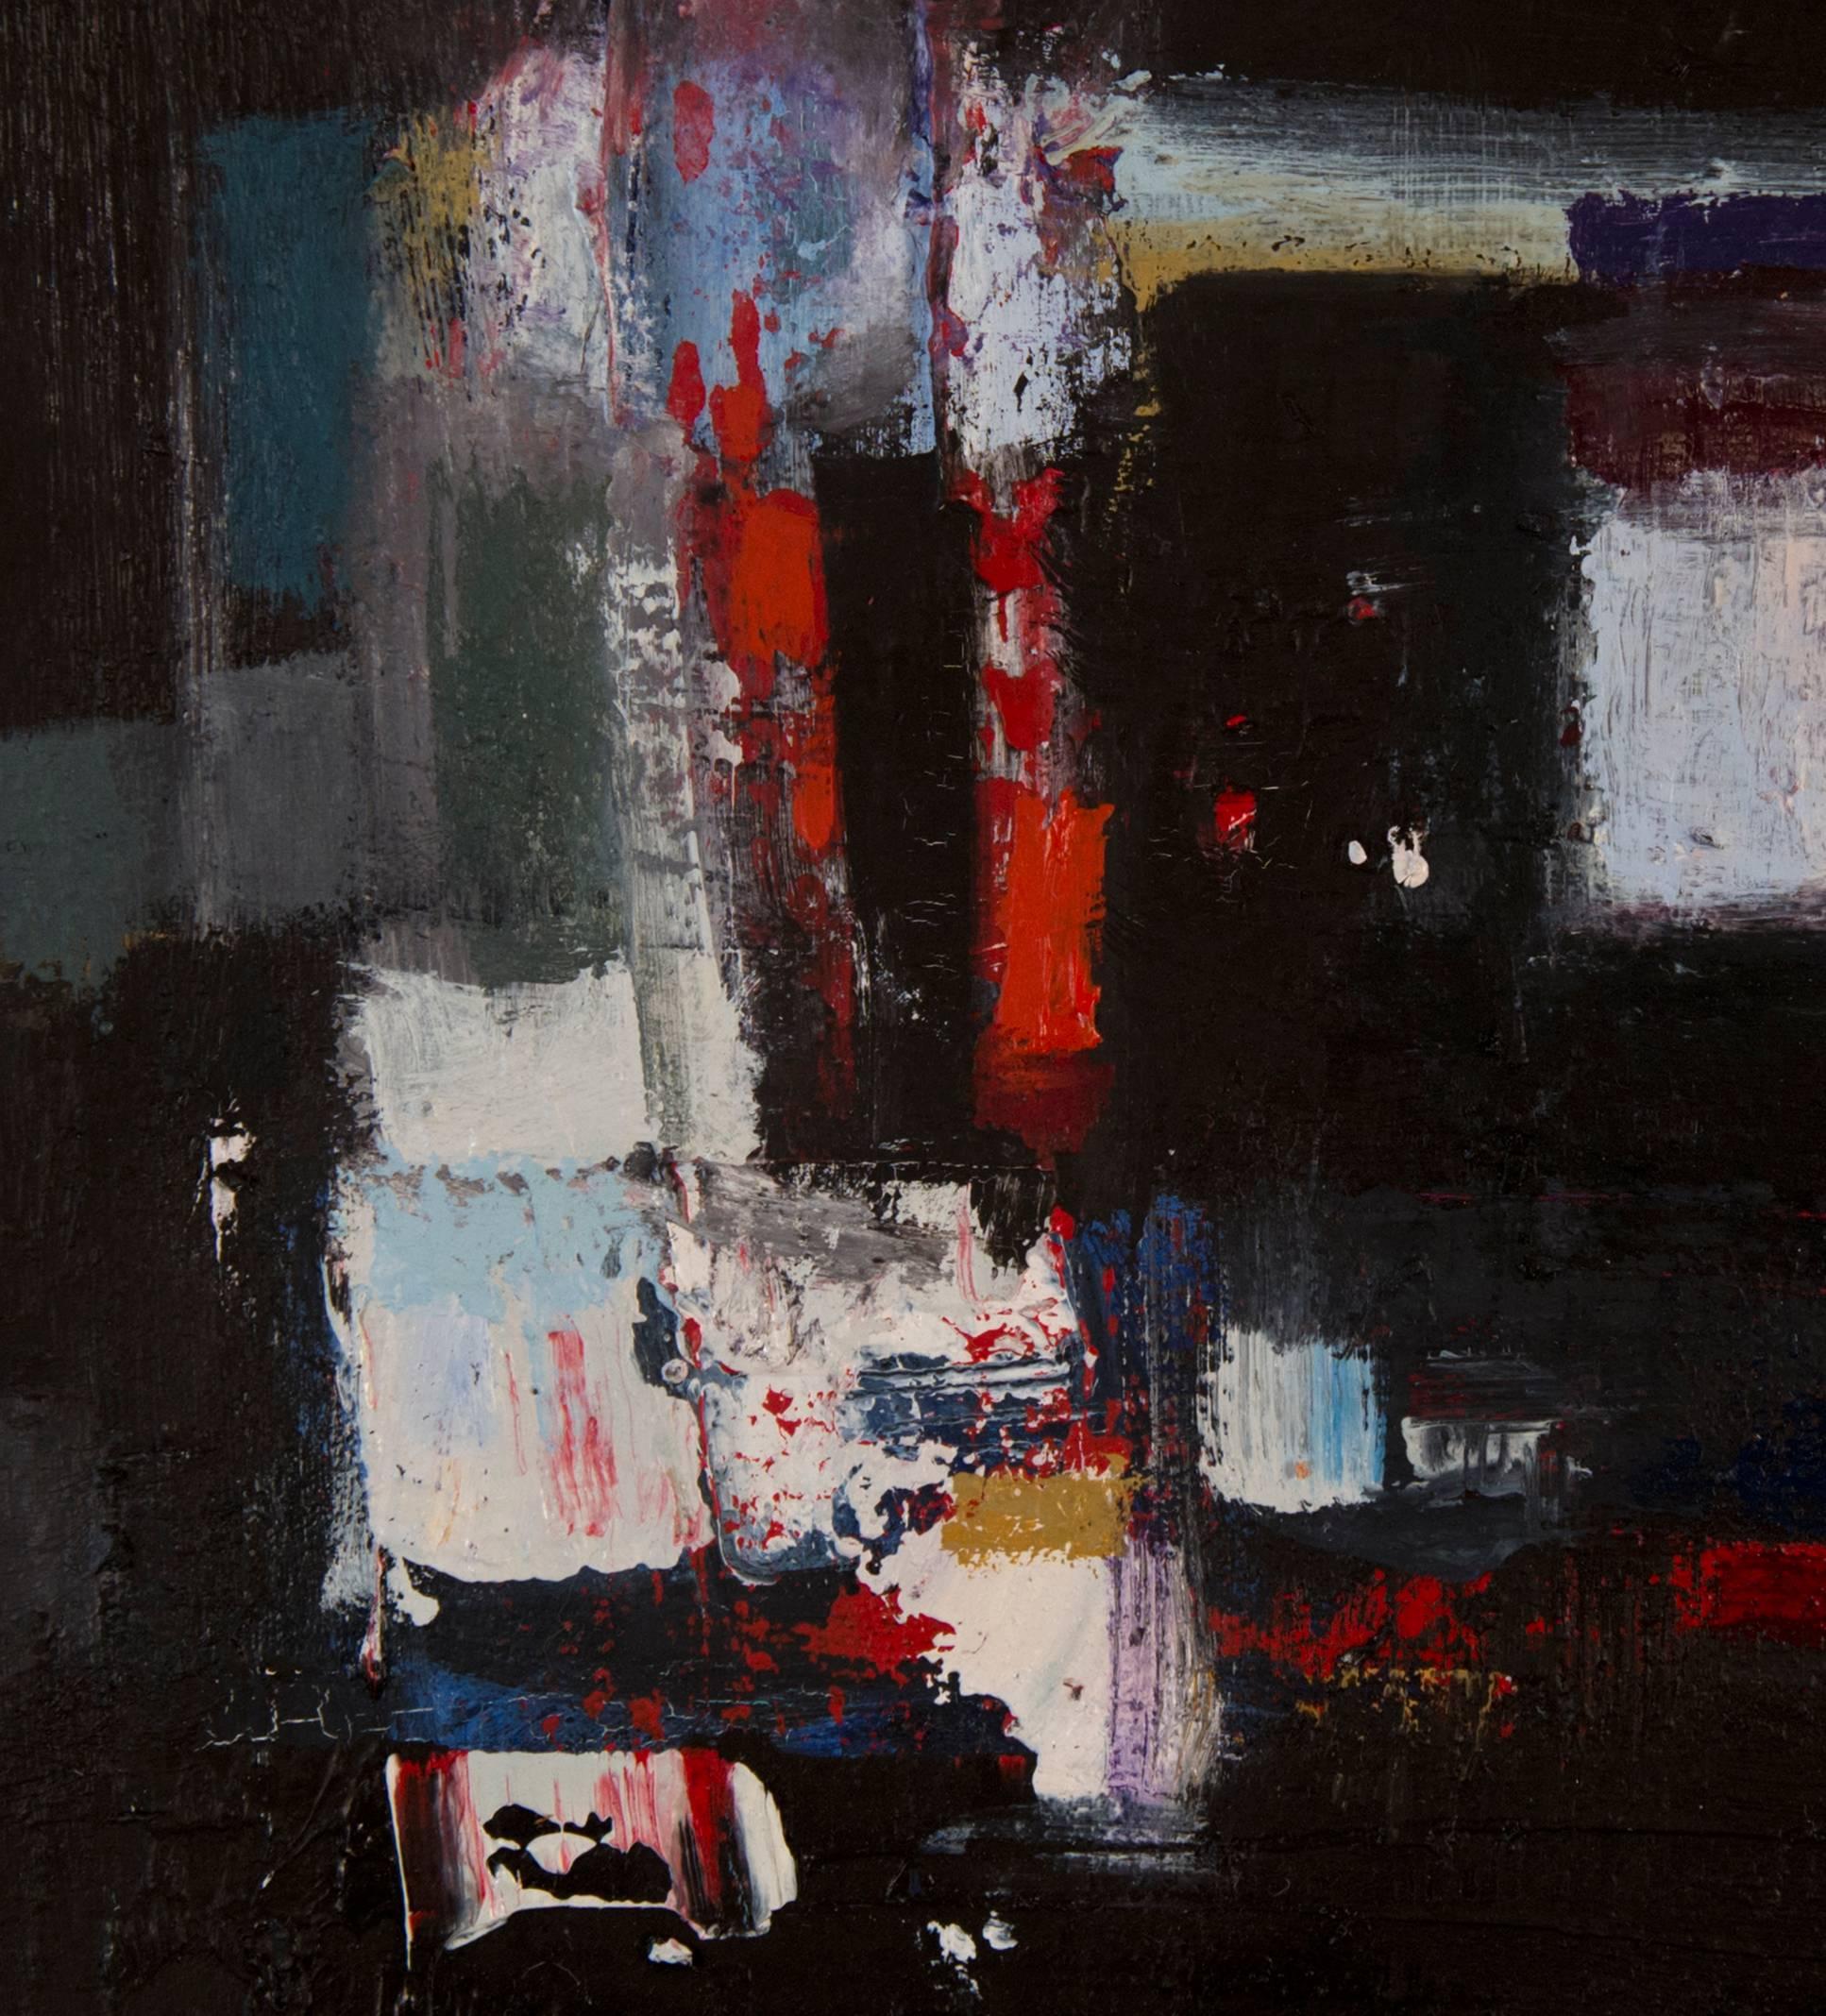 Chinatown Revisited 2 - Abstract Painting by Emilia Dubicki